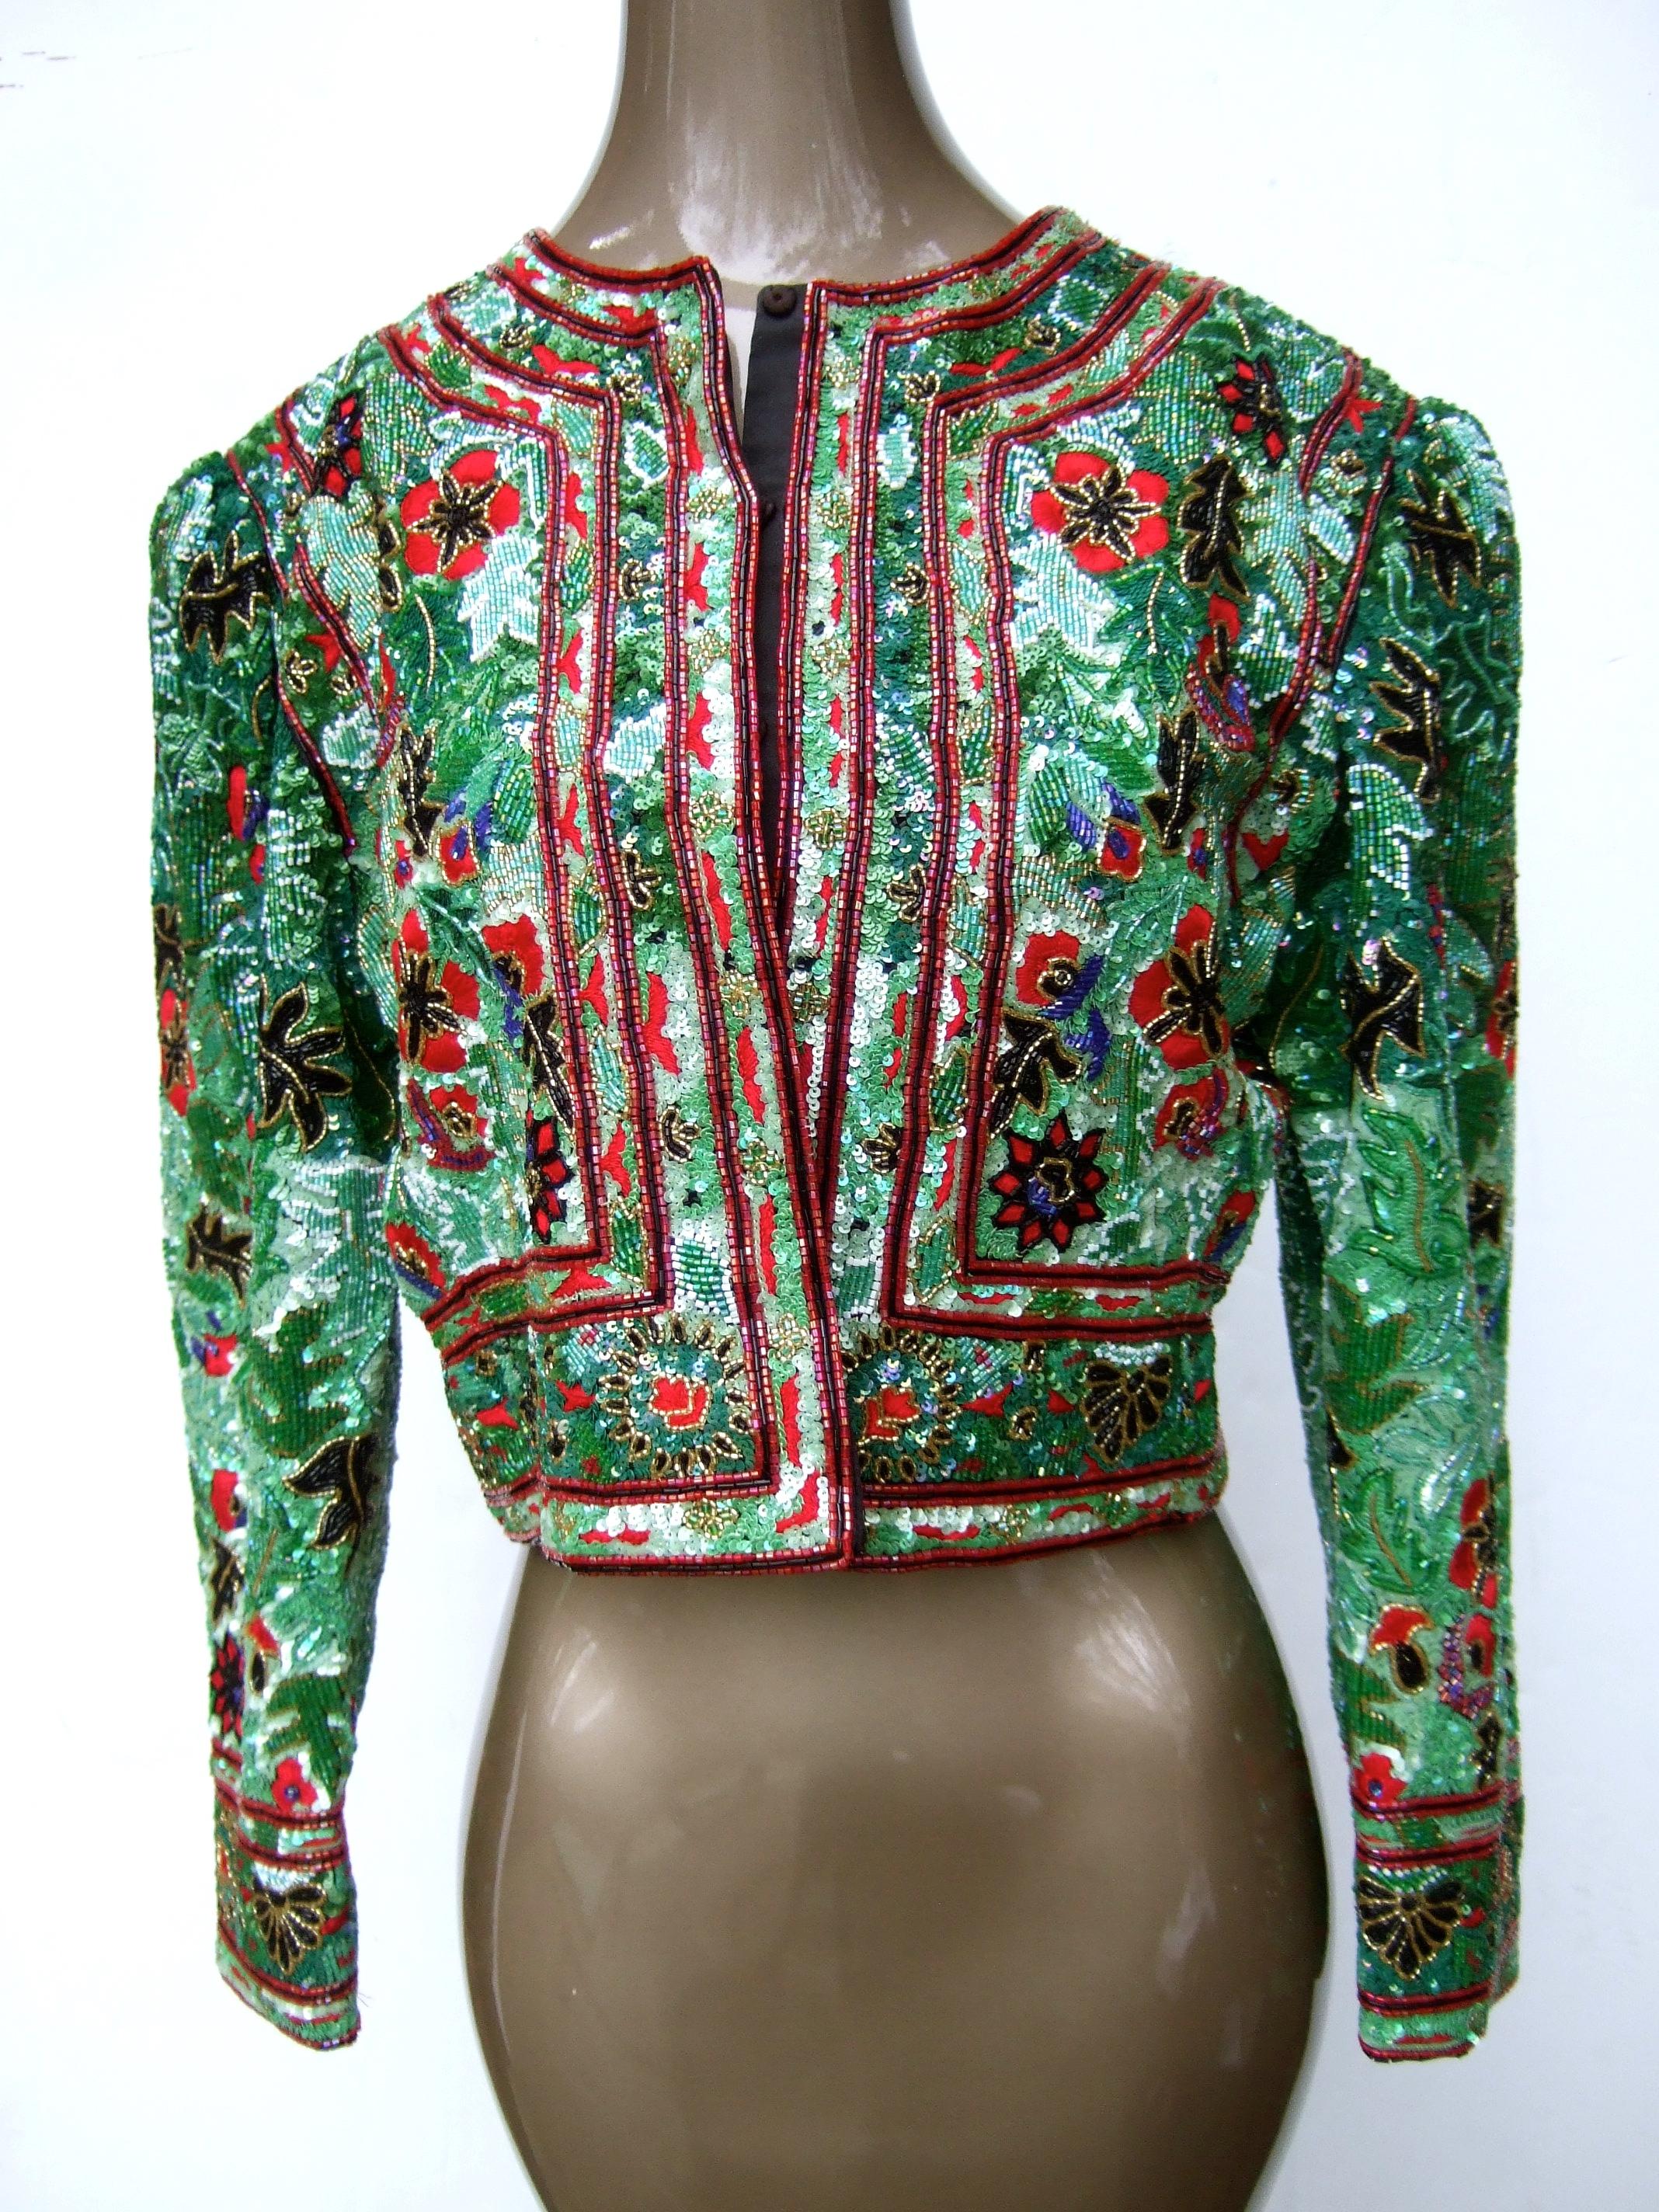 Exquisite Elaborate Glass Floral Beaded Embroidered Bolero Jacket c 1980s In Good Condition For Sale In University City, MO